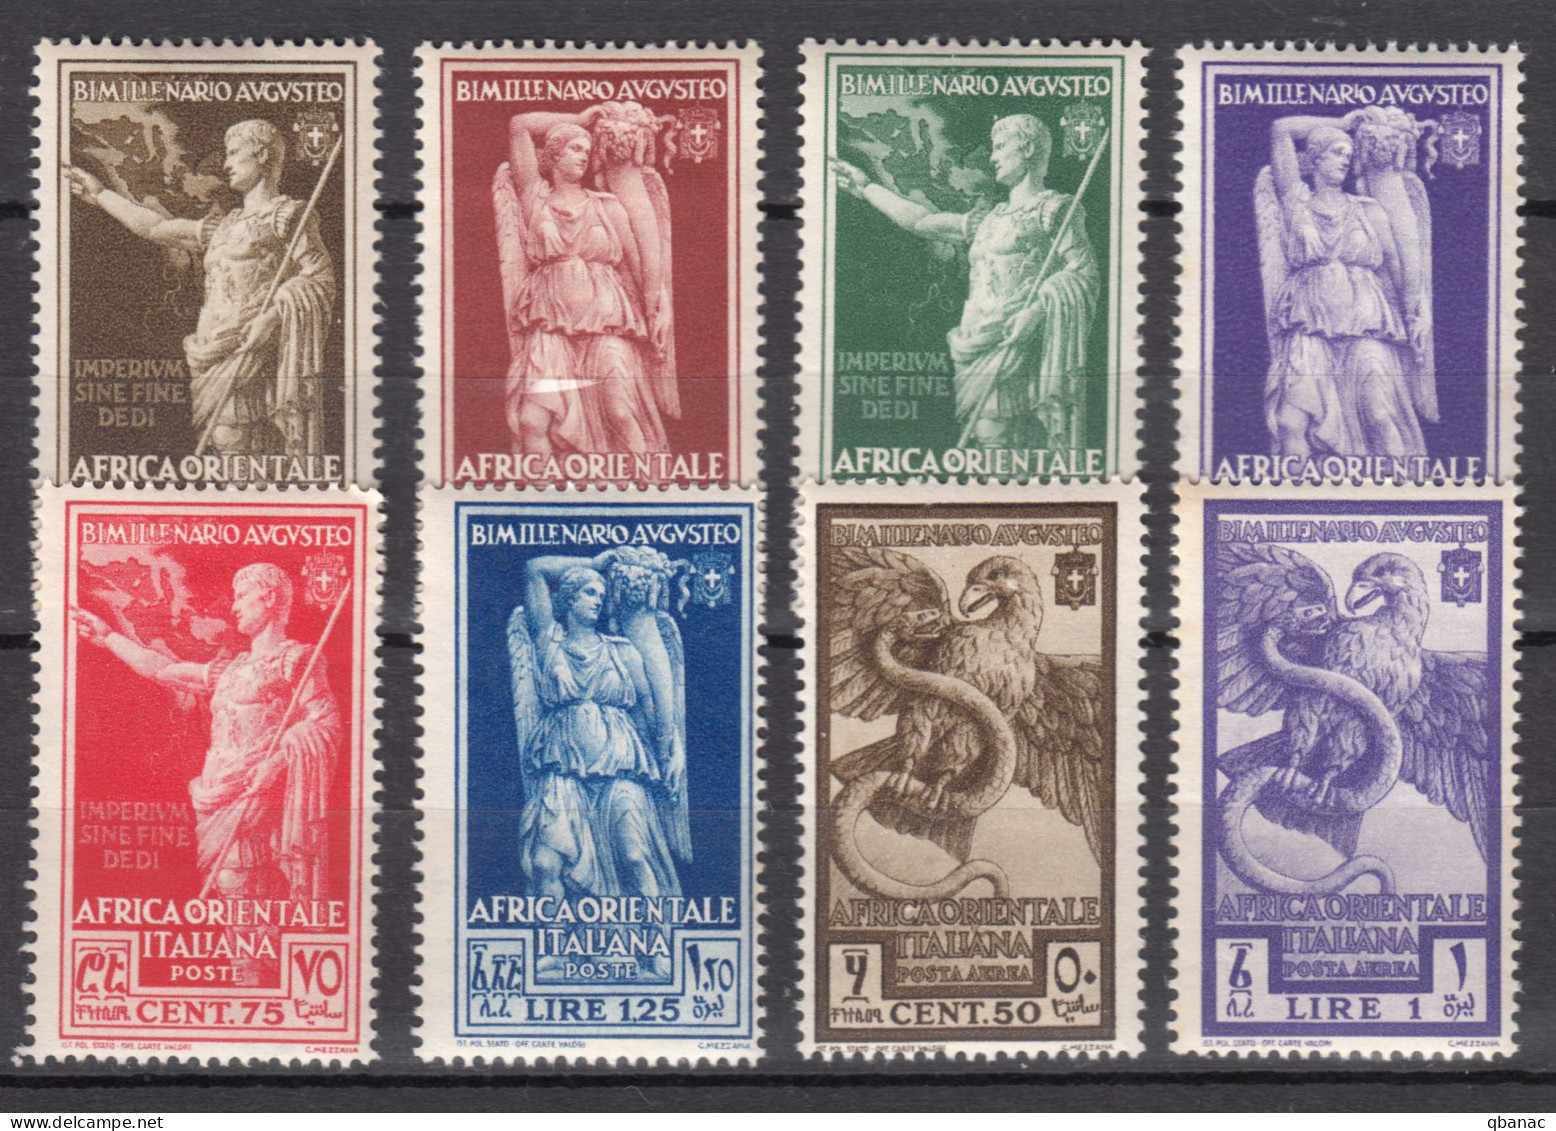 Italy Colonies East Africa 1938 Sassone#21-26 + Posta Aerea #A14-A15 Mint Never Hinged - Italiaans Oost-Afrika